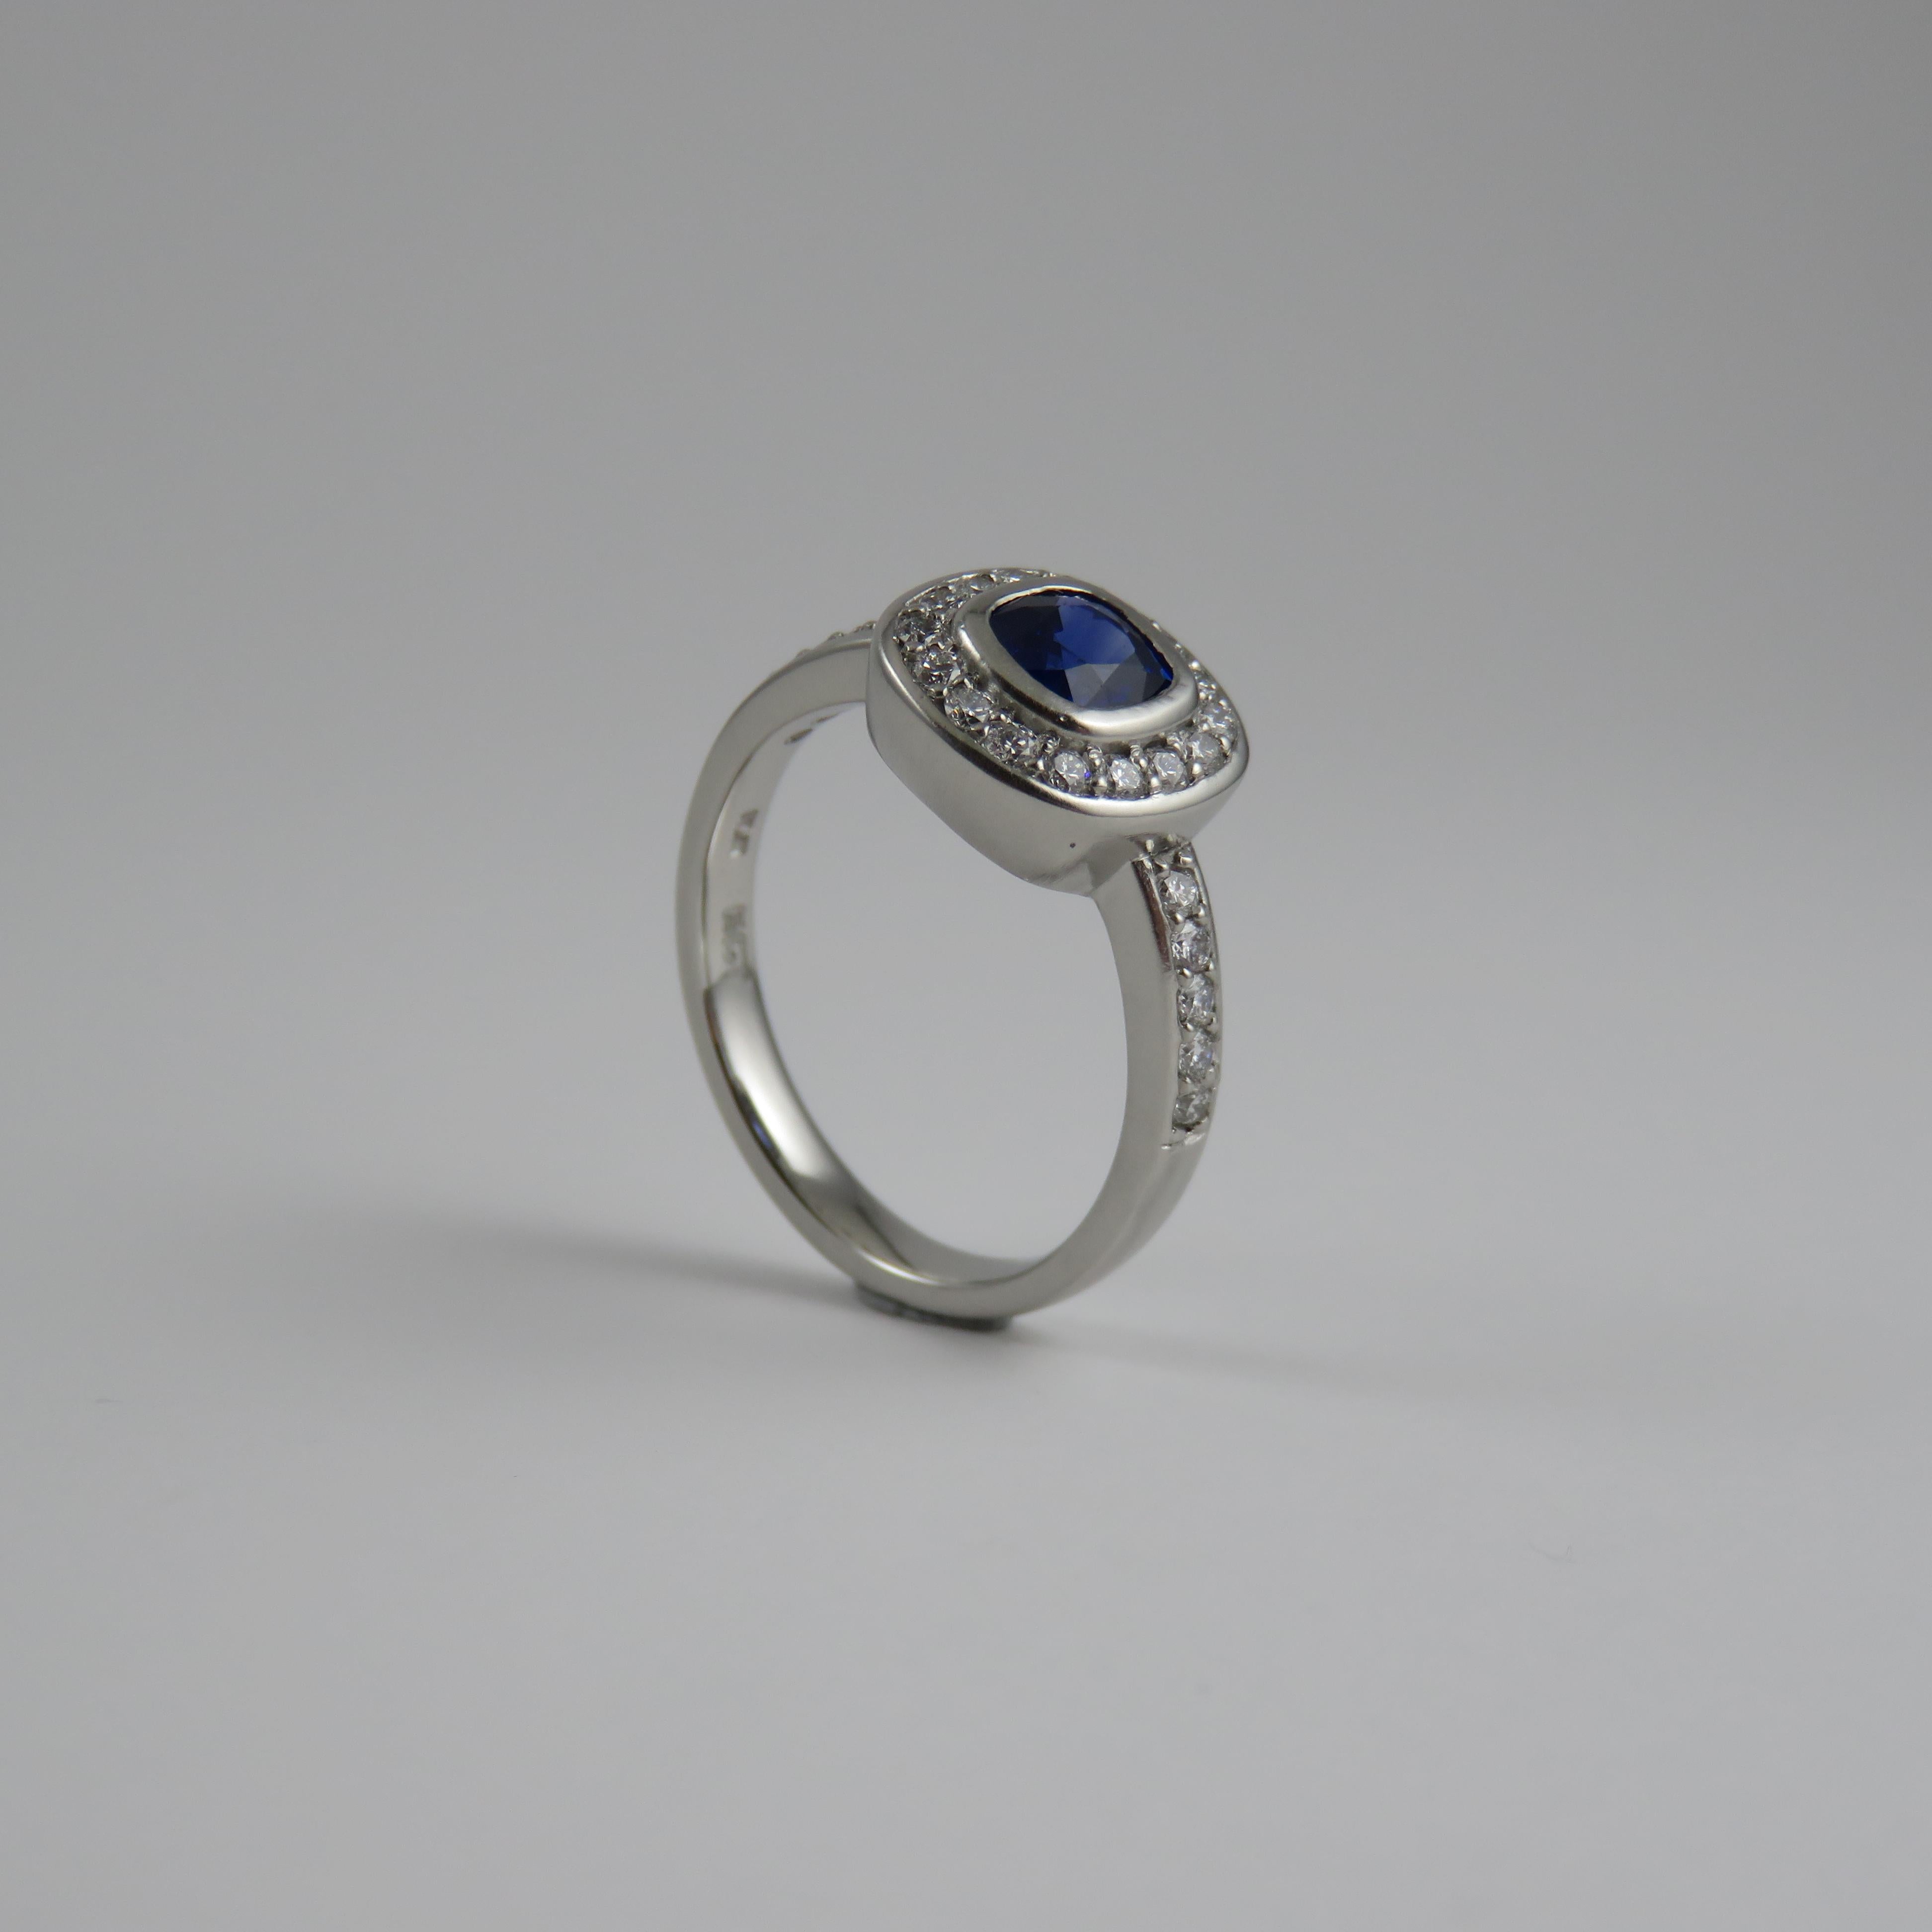 The visual elegance of sapphire with it's slightly dark violet blue color is second to none in this masterpiece design cluster style engagement ring in Platinum, with the beautiful blue sapphire with center proud rub over bezel setting totaling 0.86